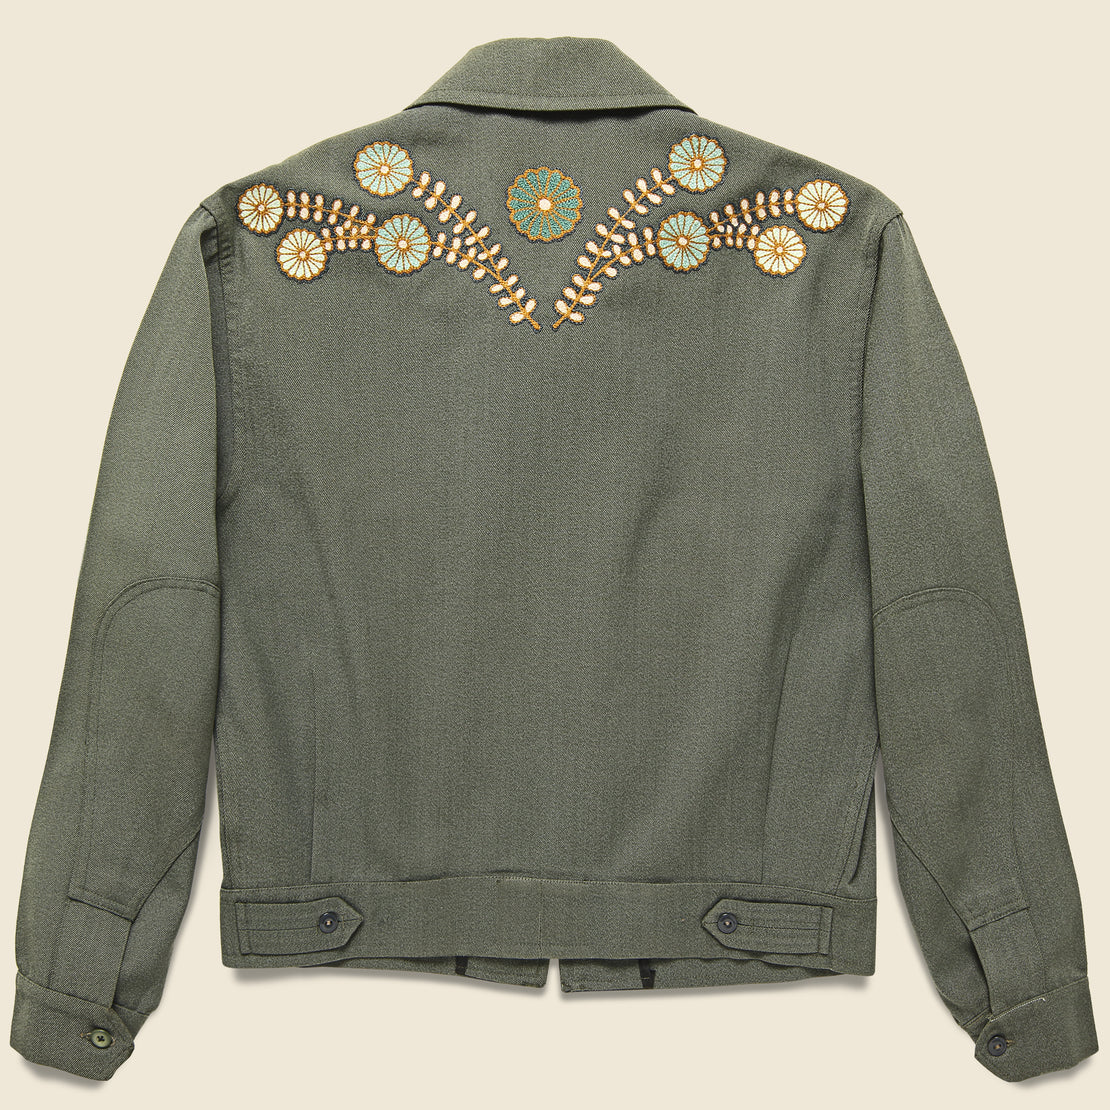 Fort Lonesome Squash Blossom Military Cropped Jacket - Sage Green